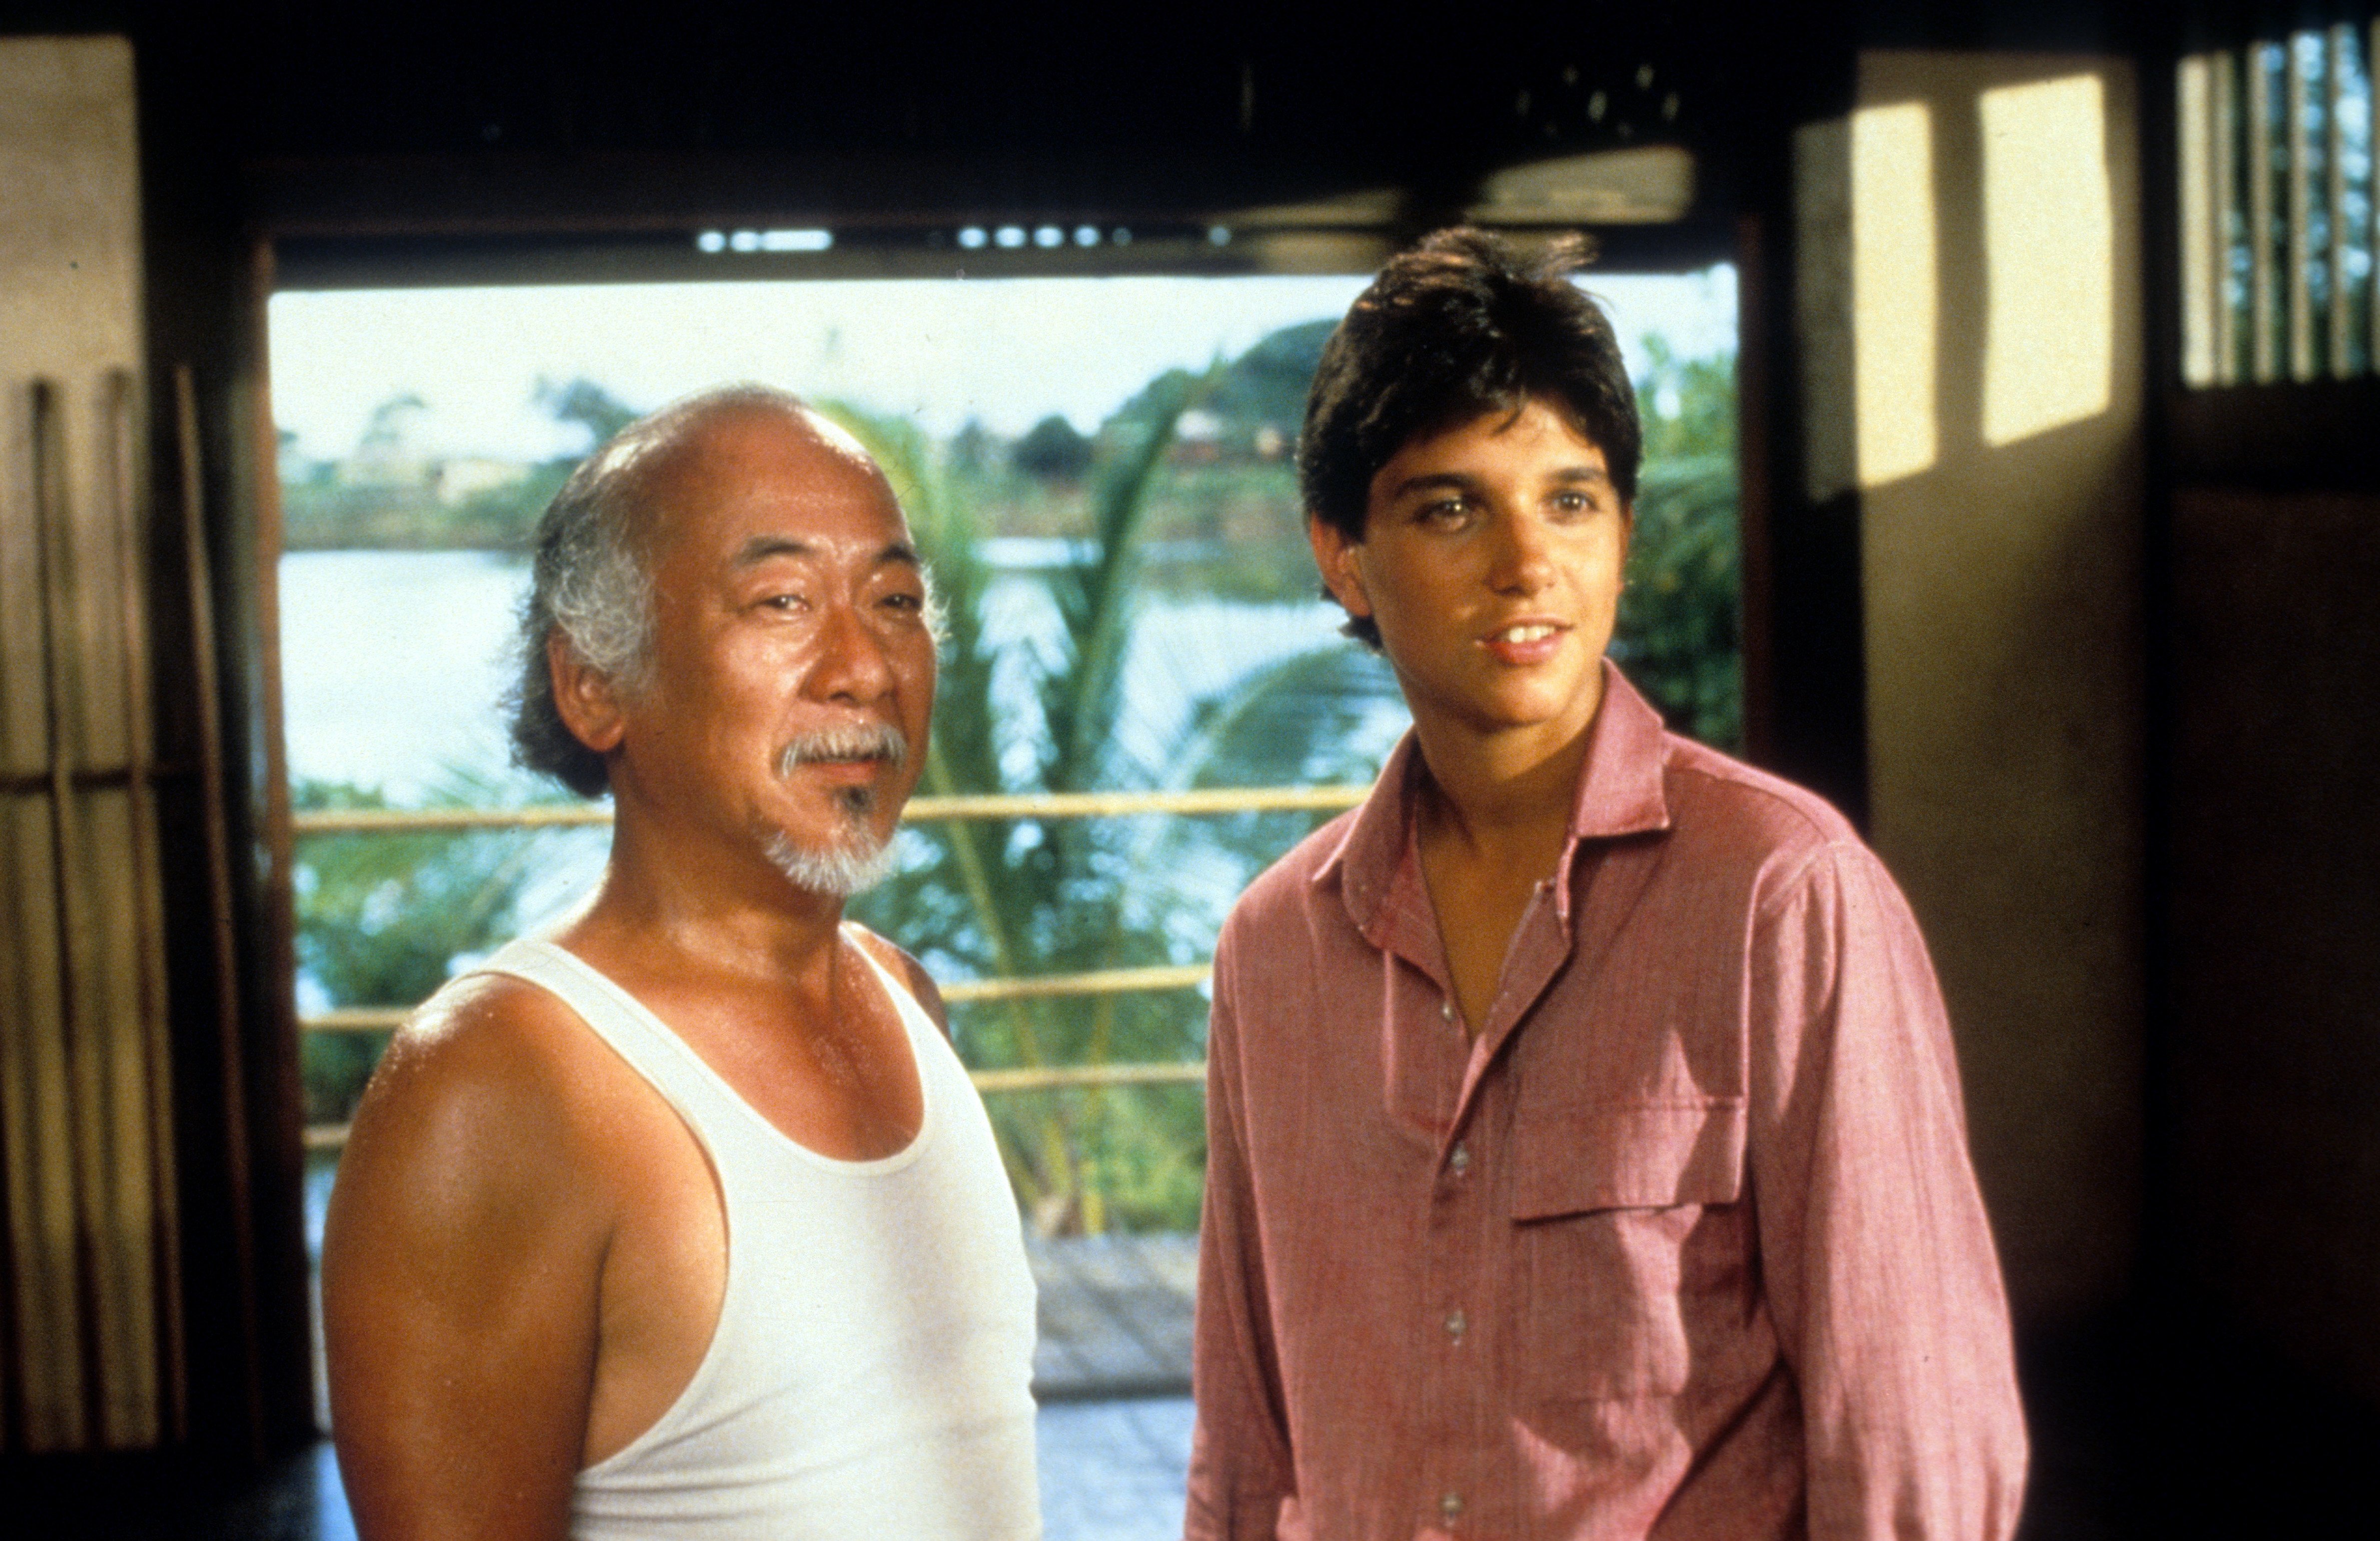 Pat Morita and actor Ralph Macchio in a scene from the film "The Karate Kid," in 1984. / Source: Getty Images 